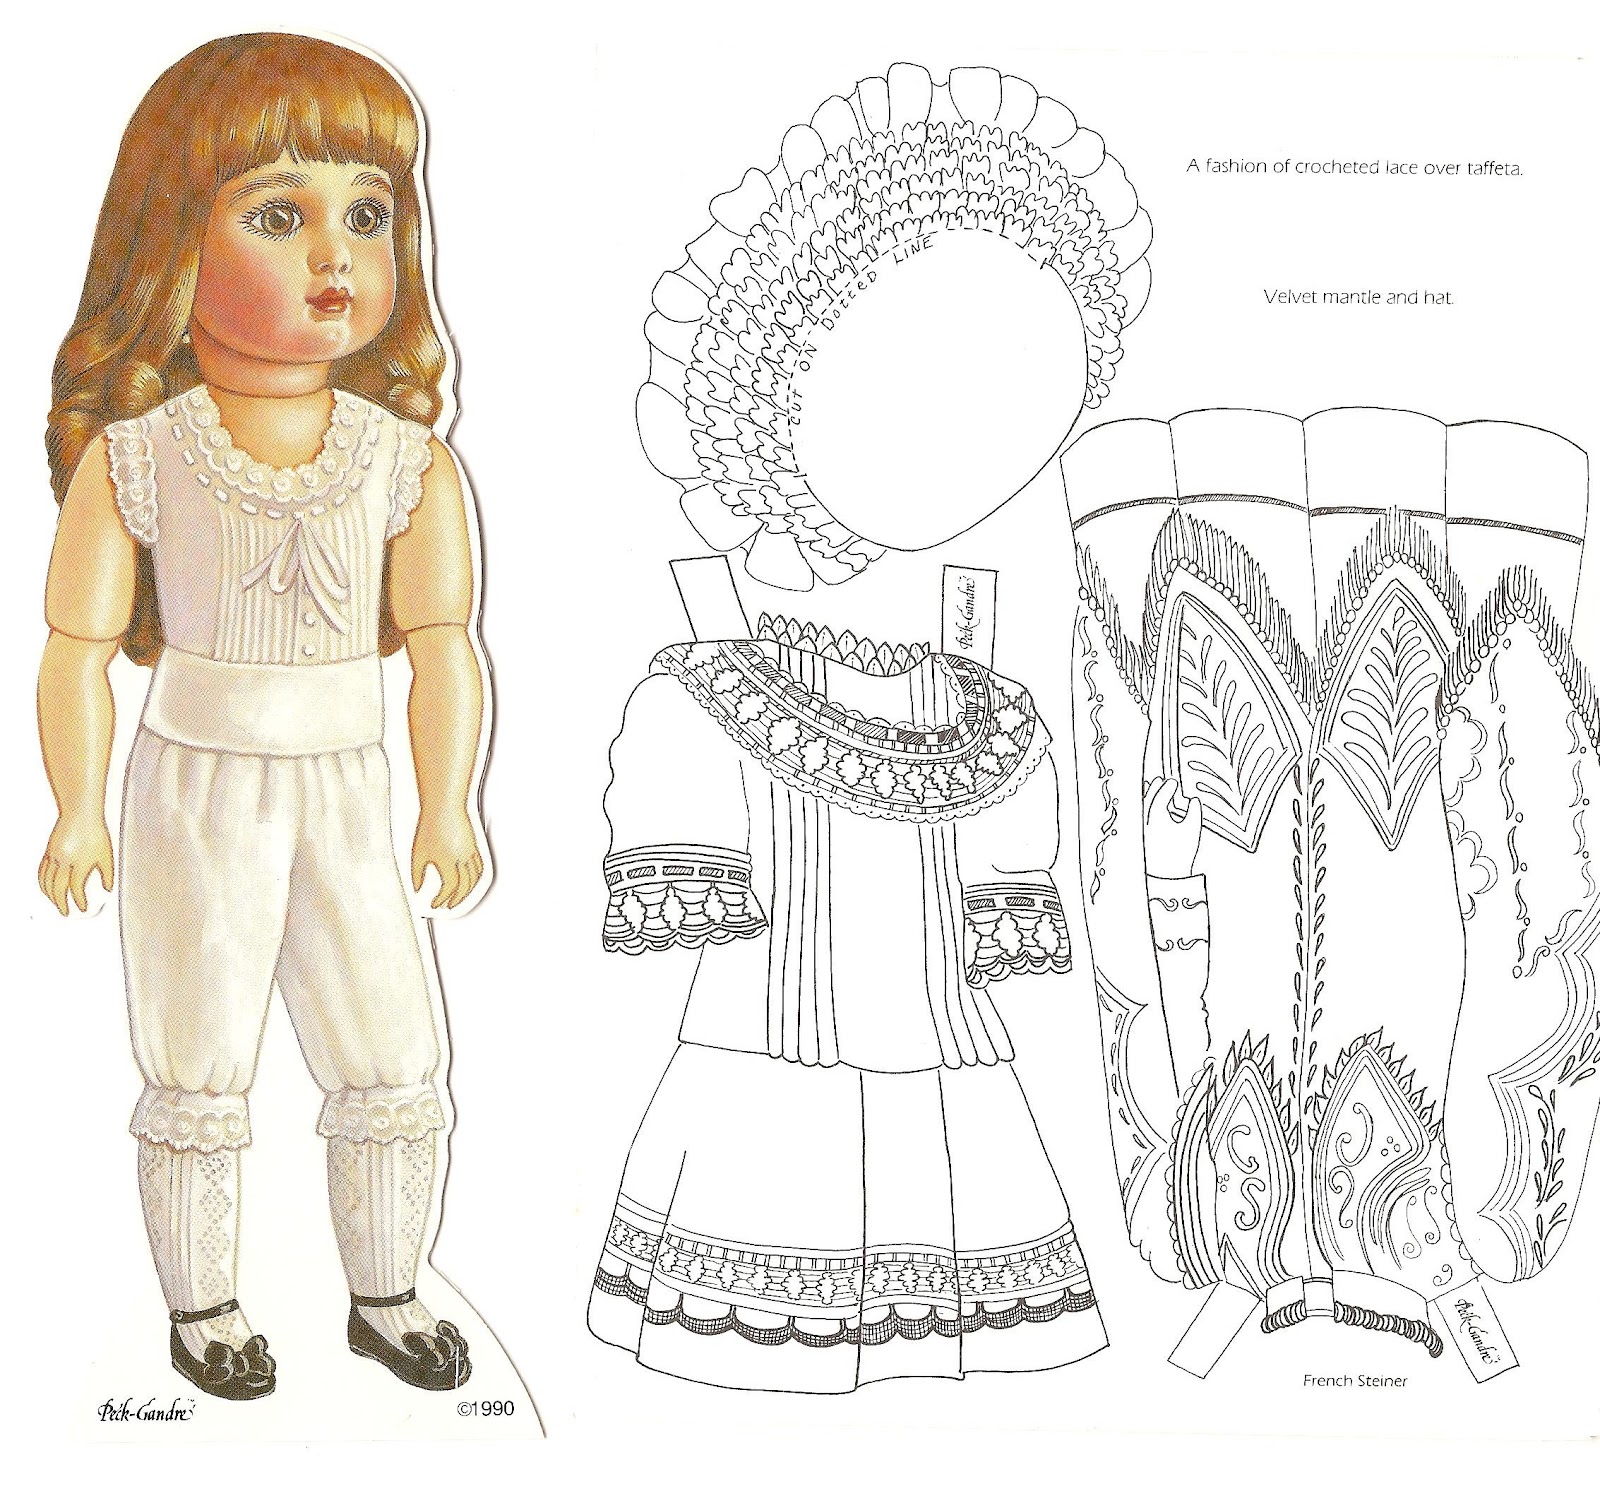 Mostly Paper Dolls August - JoBSPapa.com